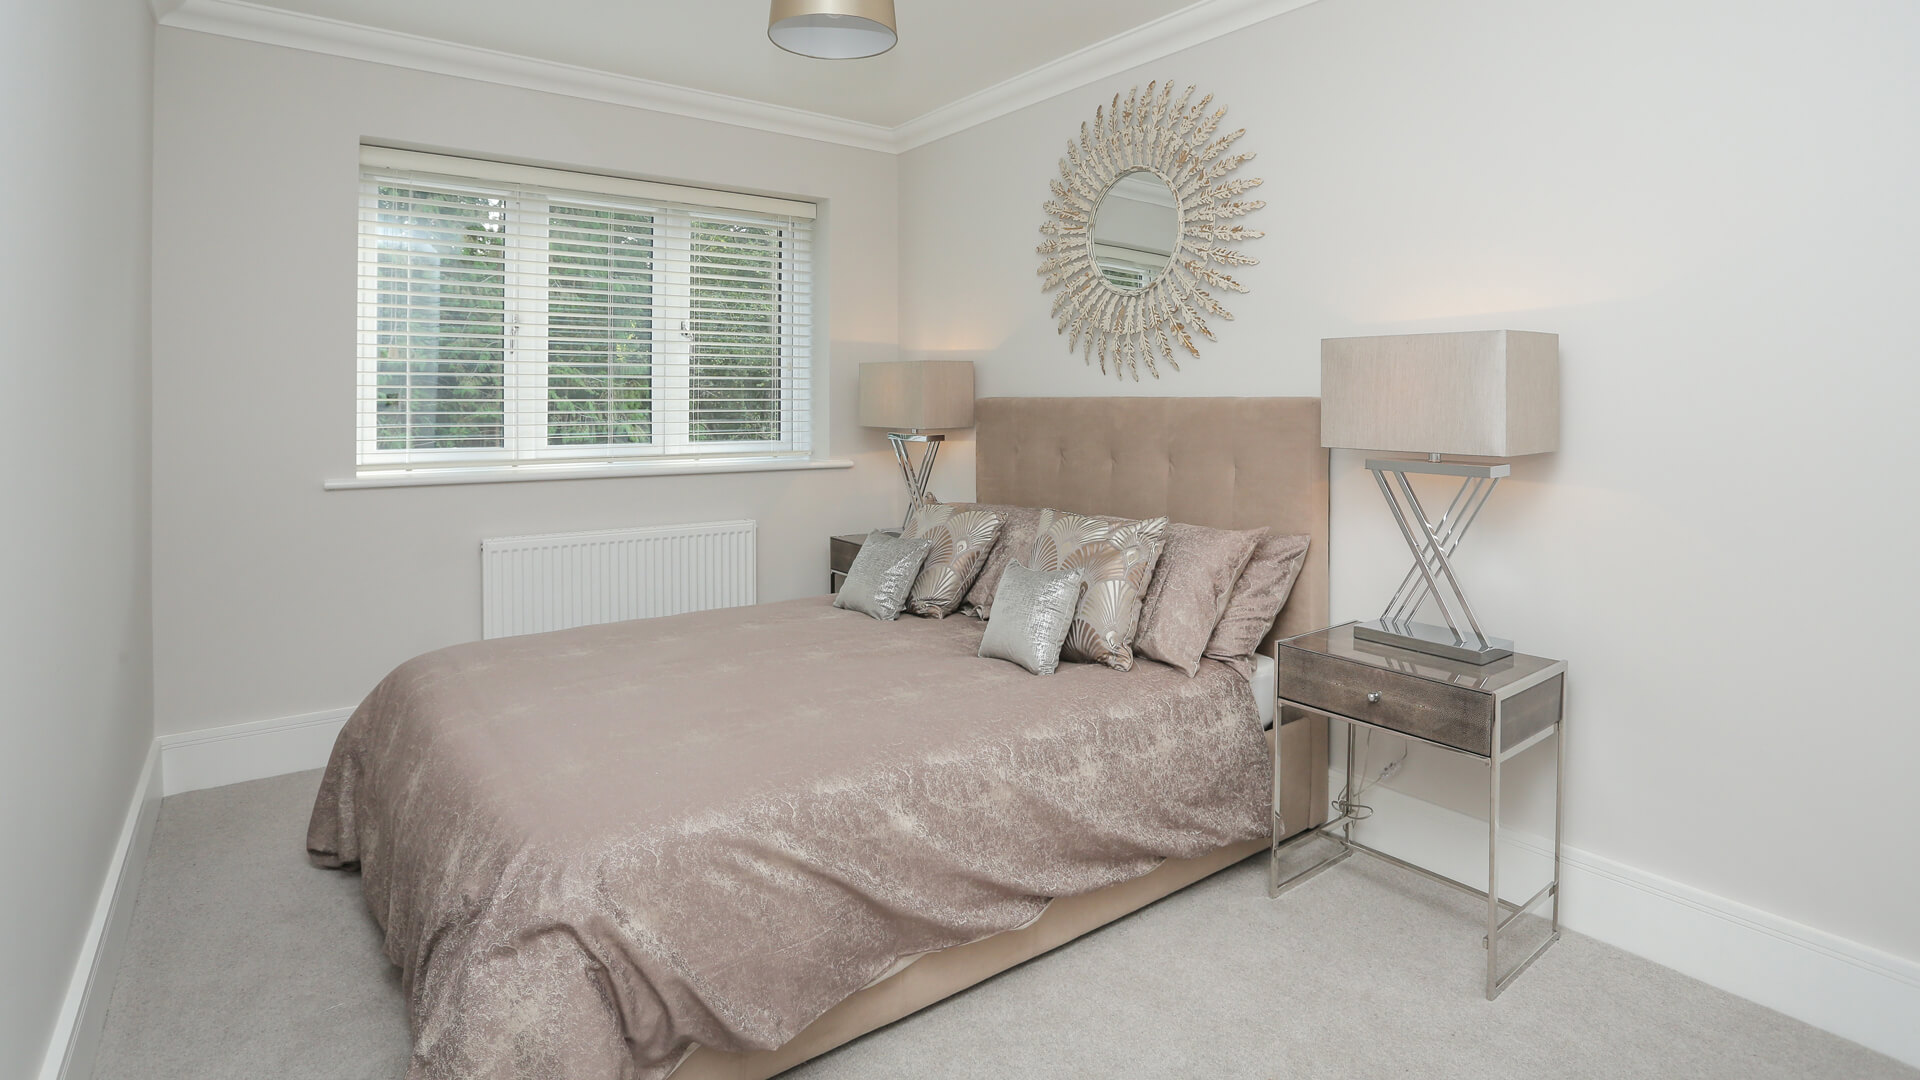 Dressed double bed at Woodside court